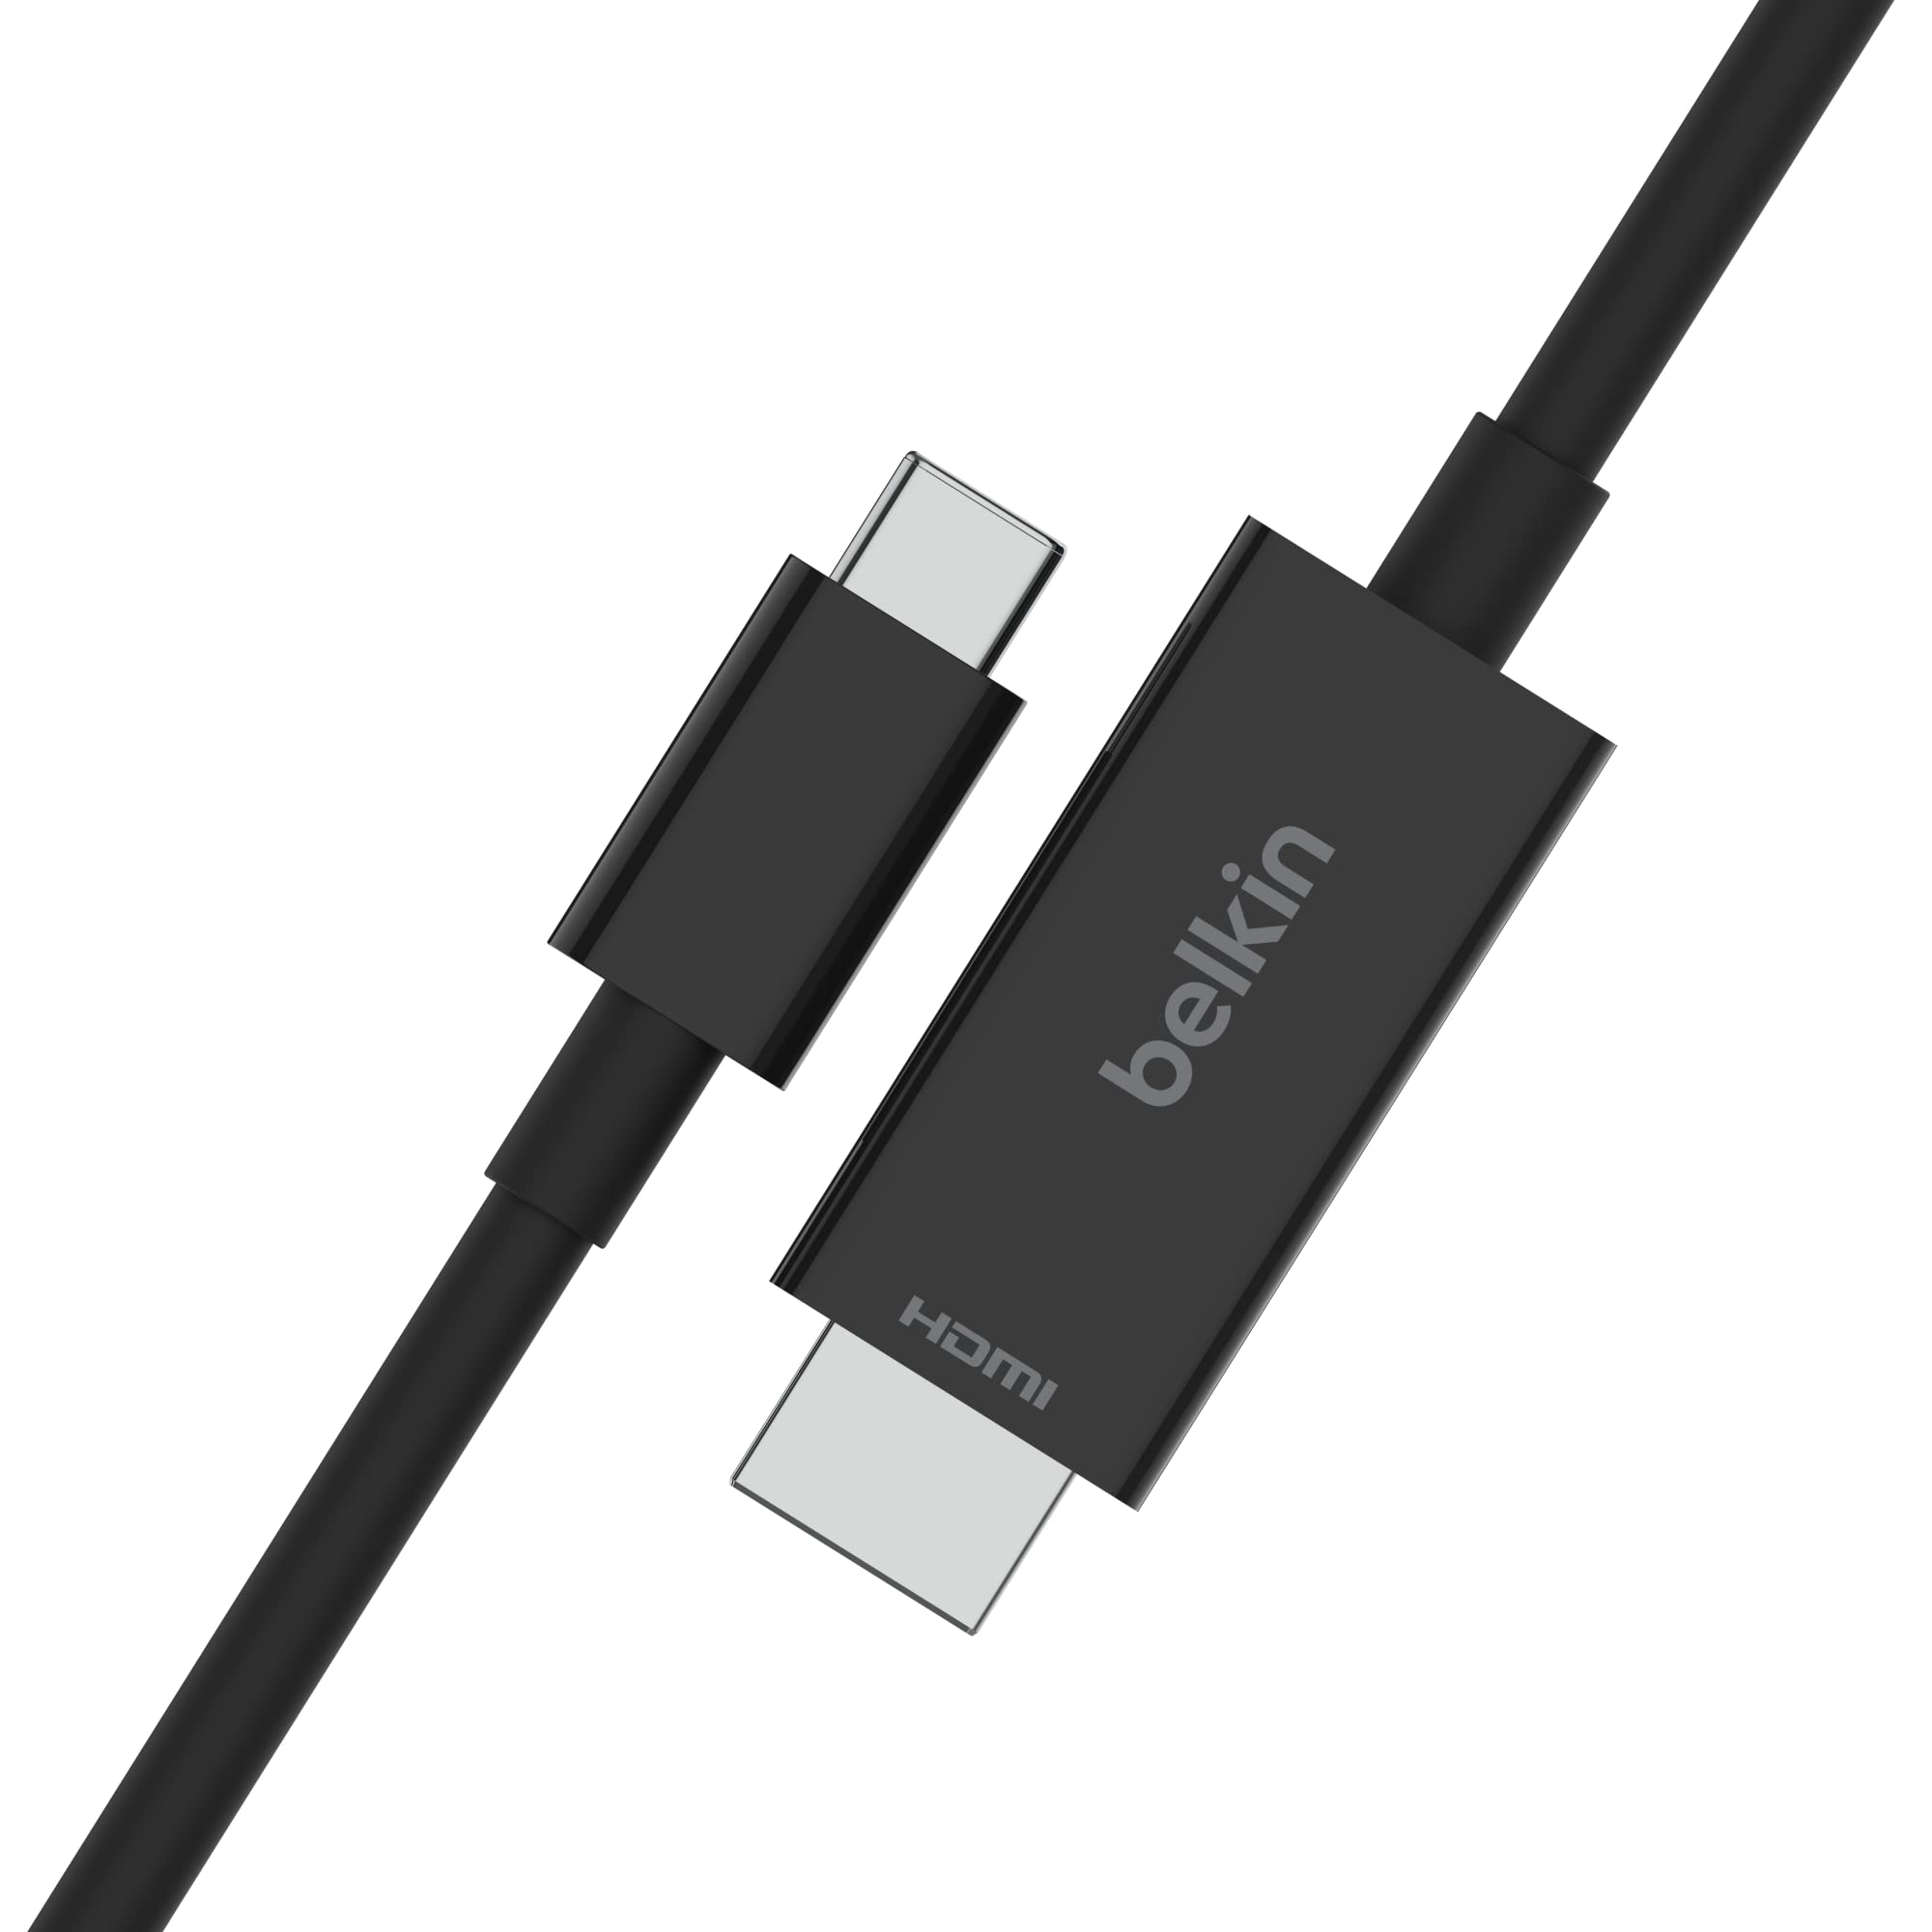 Belkin USB Type C to HDMI 2.1 Cable, 6.6FT/2M Cable with 8K@60Hz, 4K@144Hz, HDR, HBR3, DSC, HDCP 2.2, Works with Chromebook Certified, Compatible with MacBook, iPad Pro and Other USB C Devices